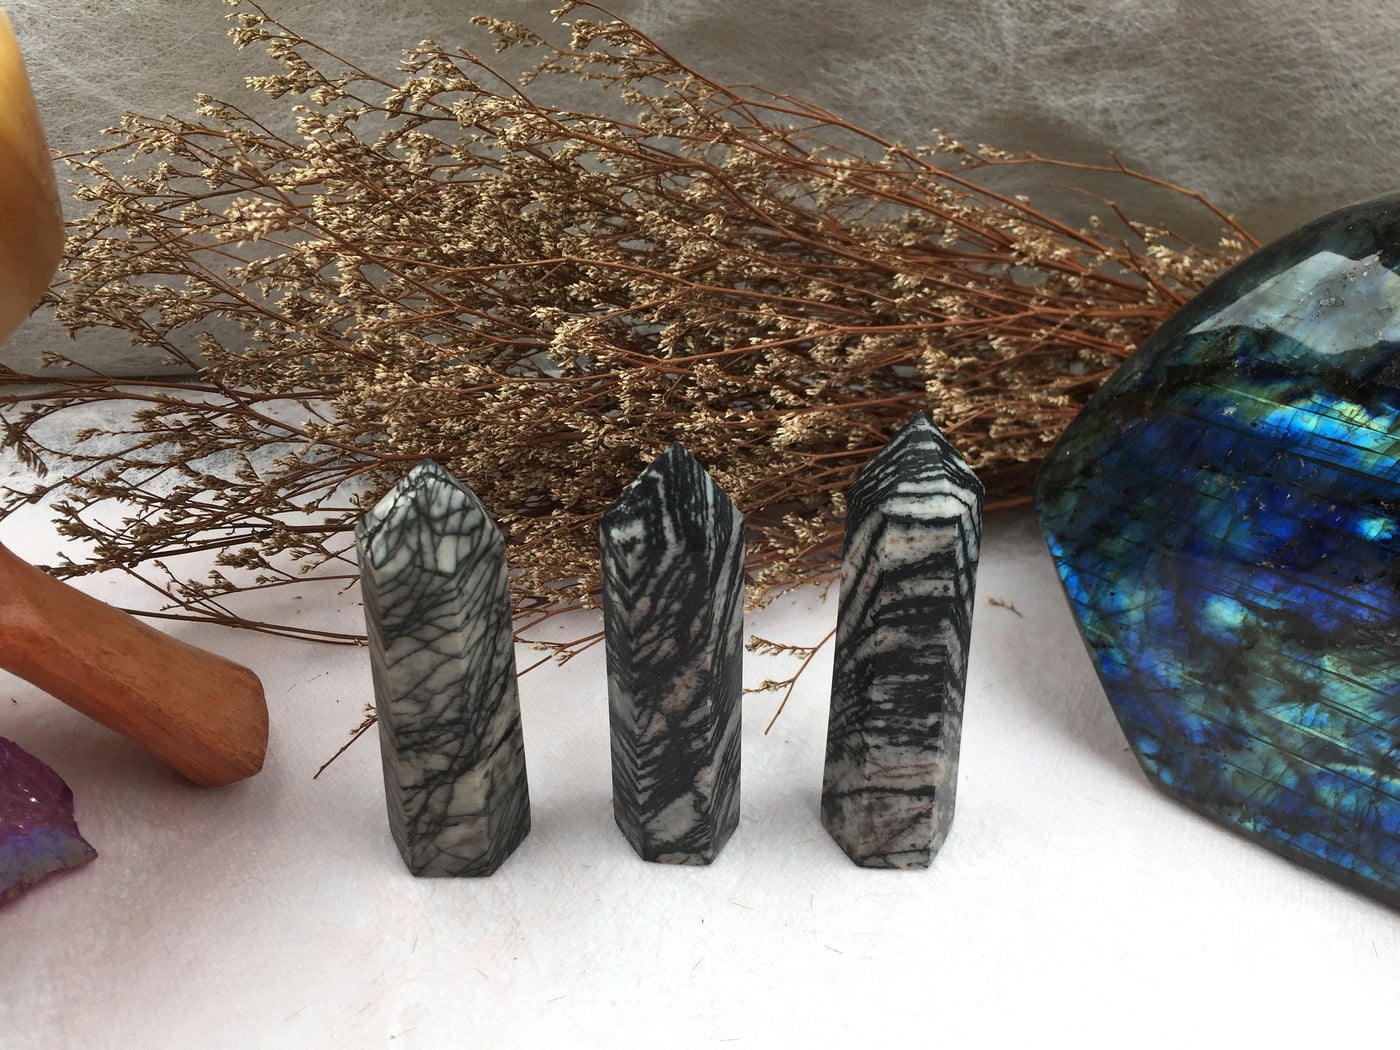 Black Line Stone Tower,Black Line Stone Point,Crystal Tower/Wand,Healing Crystal,Reiki Chakra Stone,Home Decor,For Gift